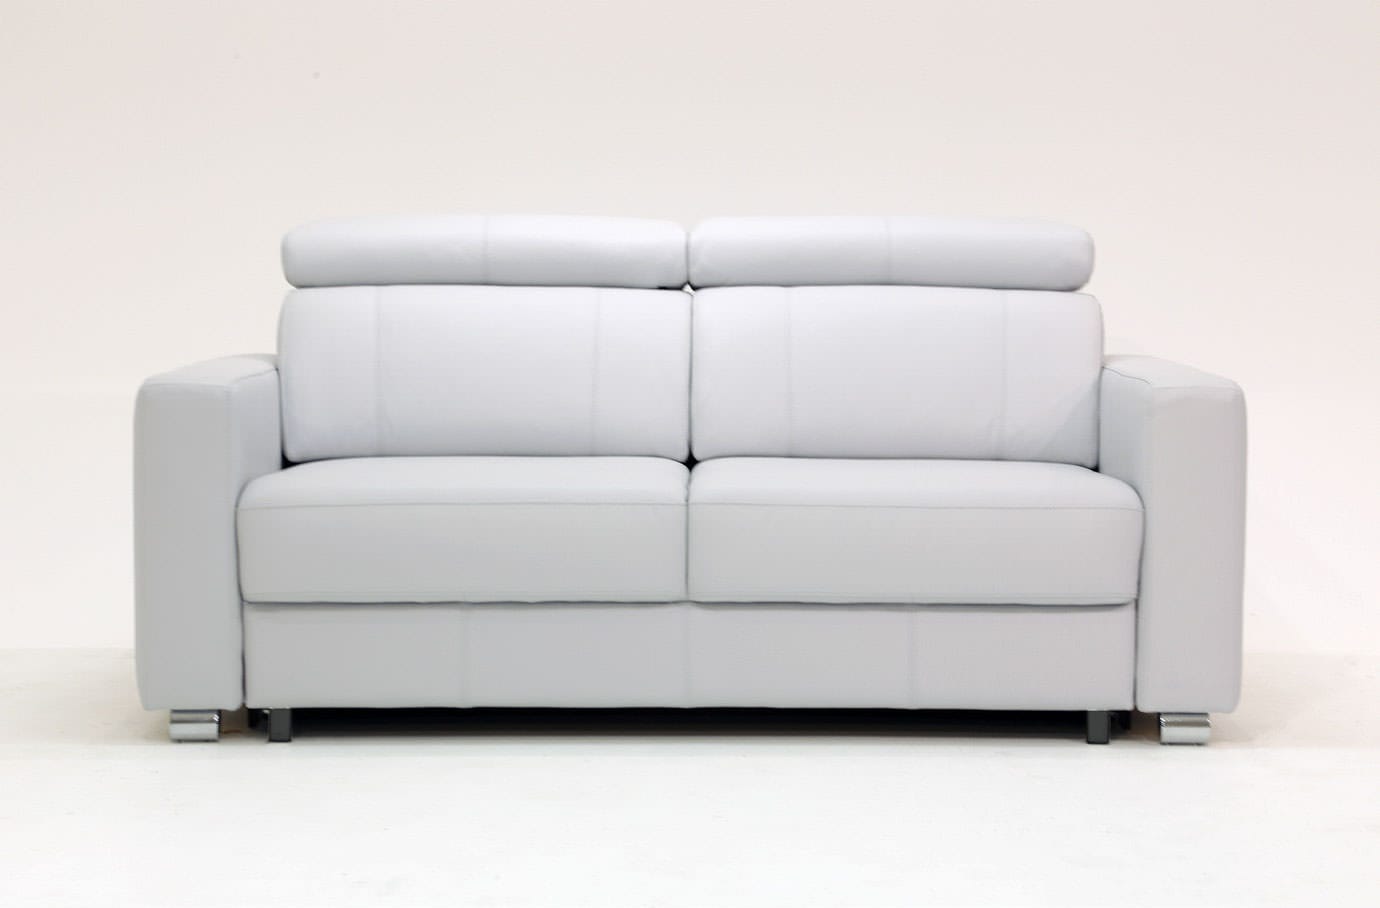 West Loveseat Sleeper Queen Size By Luonto Furniture